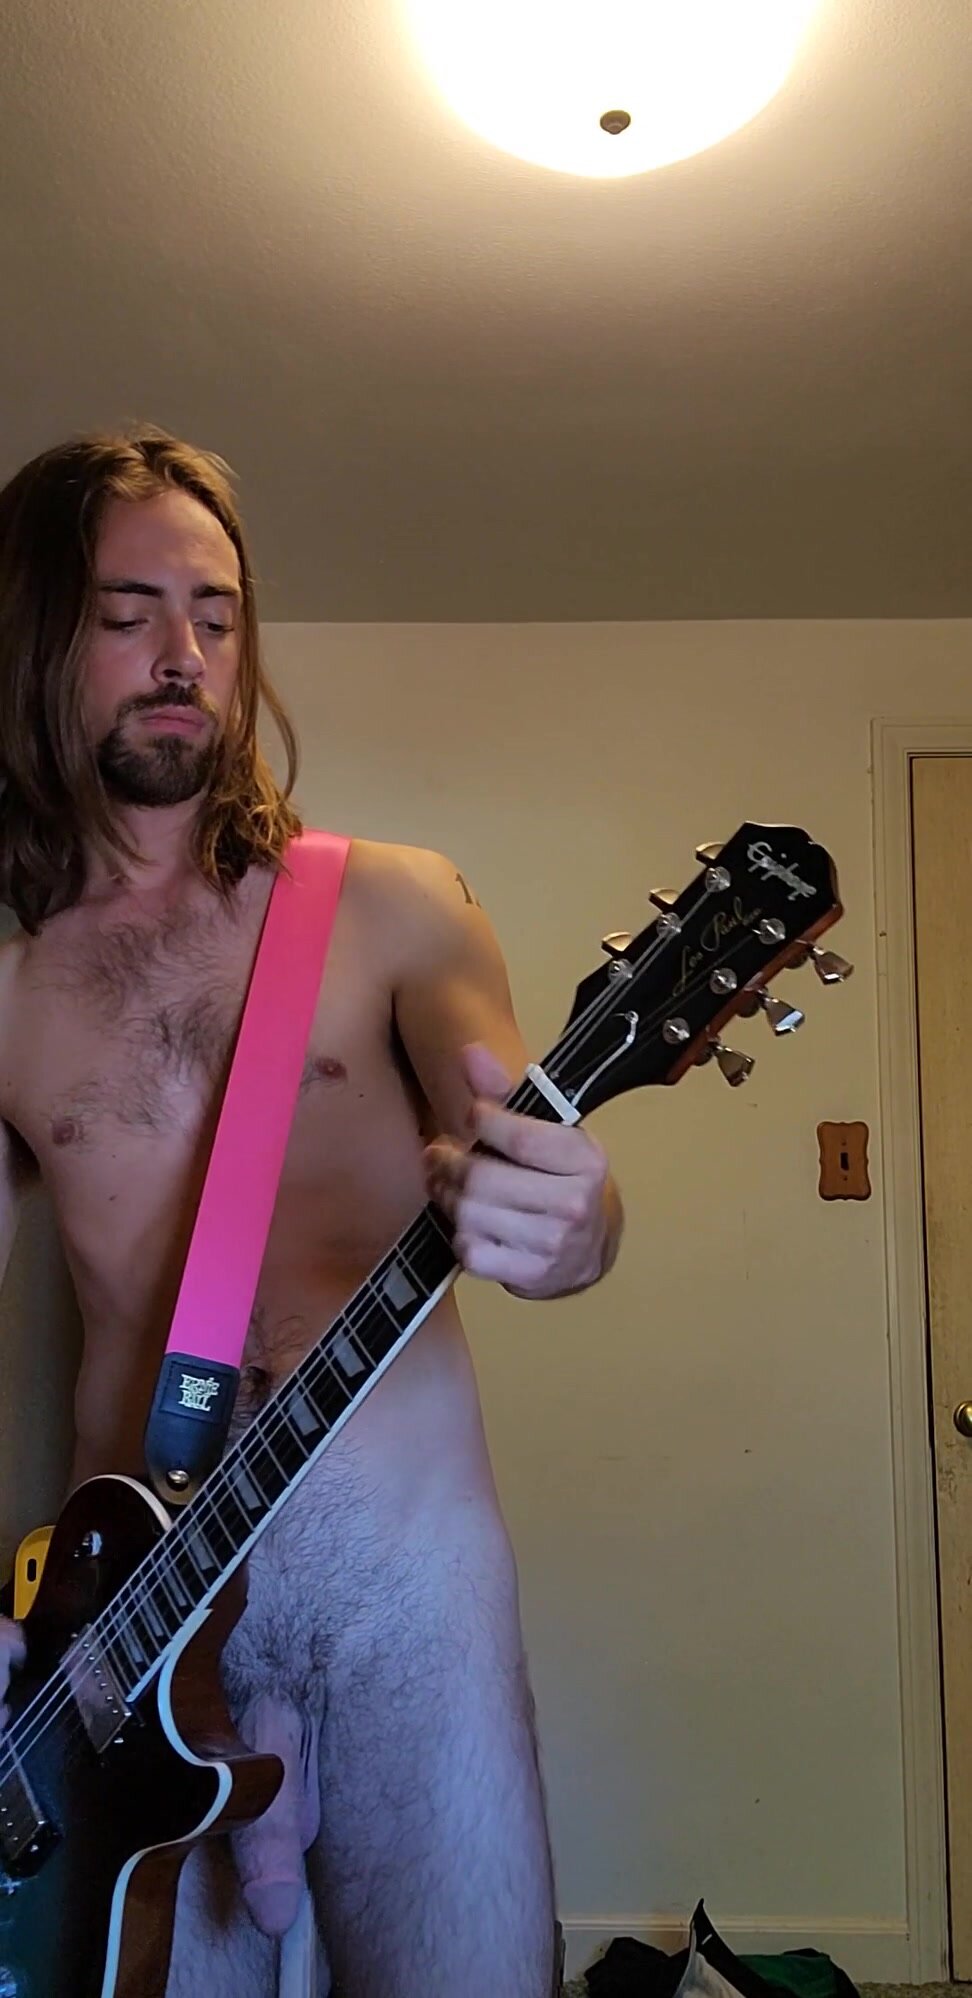 nude guitar player - video 4